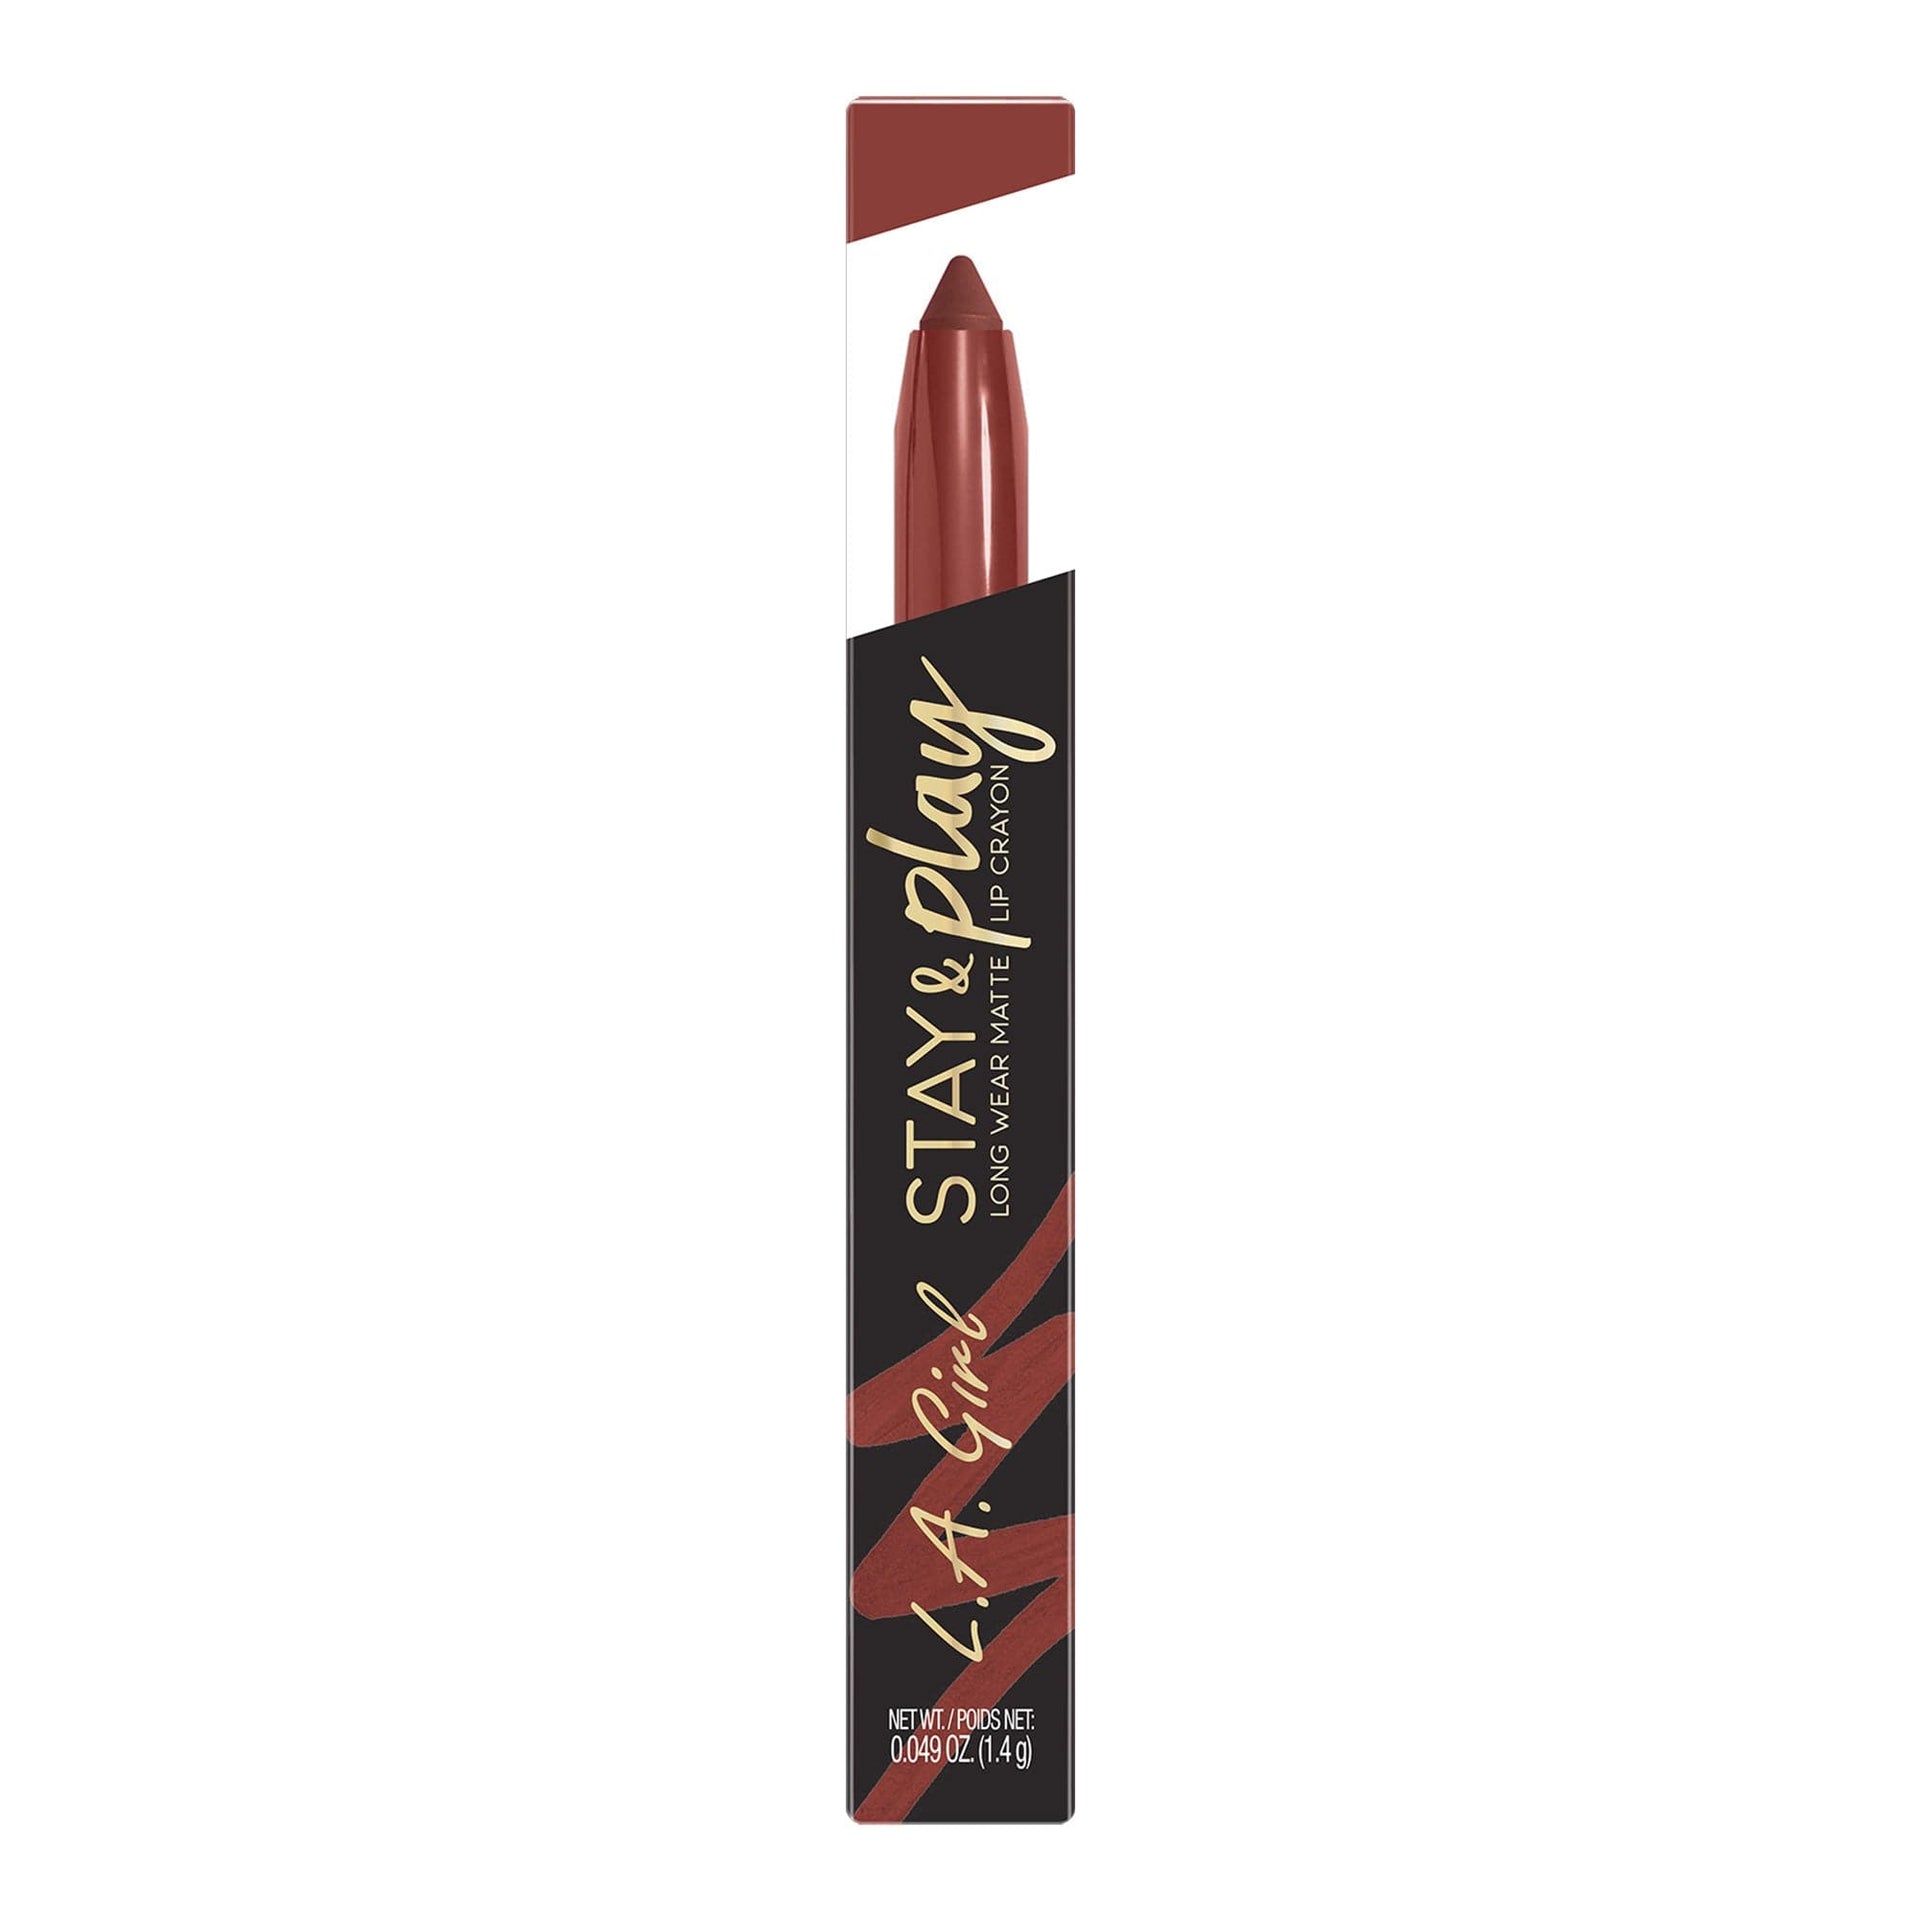 Stay and Play Lip Crayon 